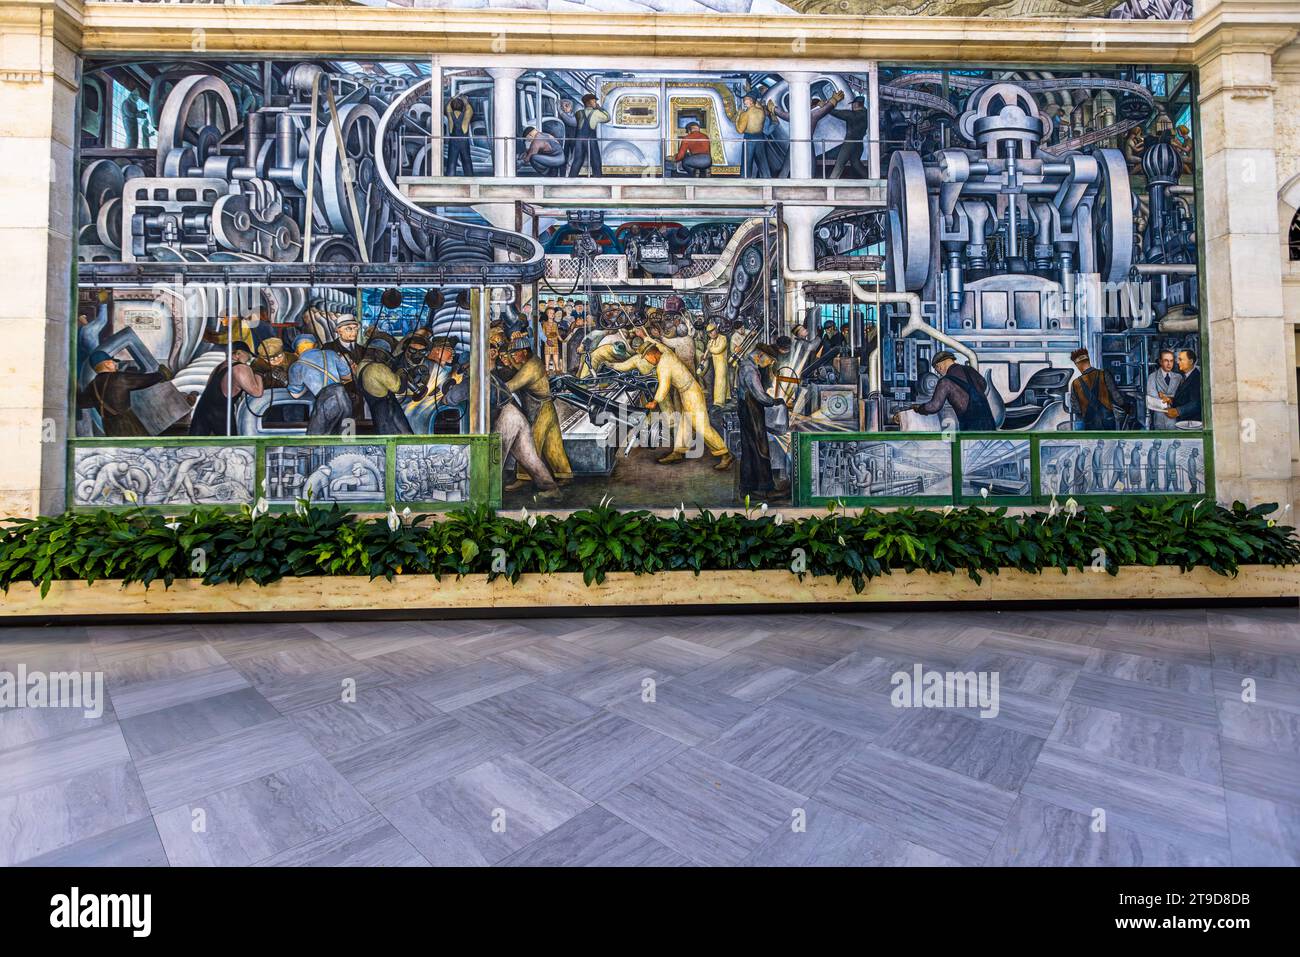 Detroit Industry Murals by Diego Rivera surround the Rivera Court at the Detroit Institute of Arts. They were created between 1932 and 1933 and were considered by Rivera to be his most successful work. The cycle focuses on the relationship between man and machine. Detroit Industry Murals in the Rivera Court of the Detroit Institute of Arts. The Mexican artist Diego Rivera captured his impressions of the industrialization of the automotive industry on large murals here between 1932 and 1933. Detroit, United States Stock Photo